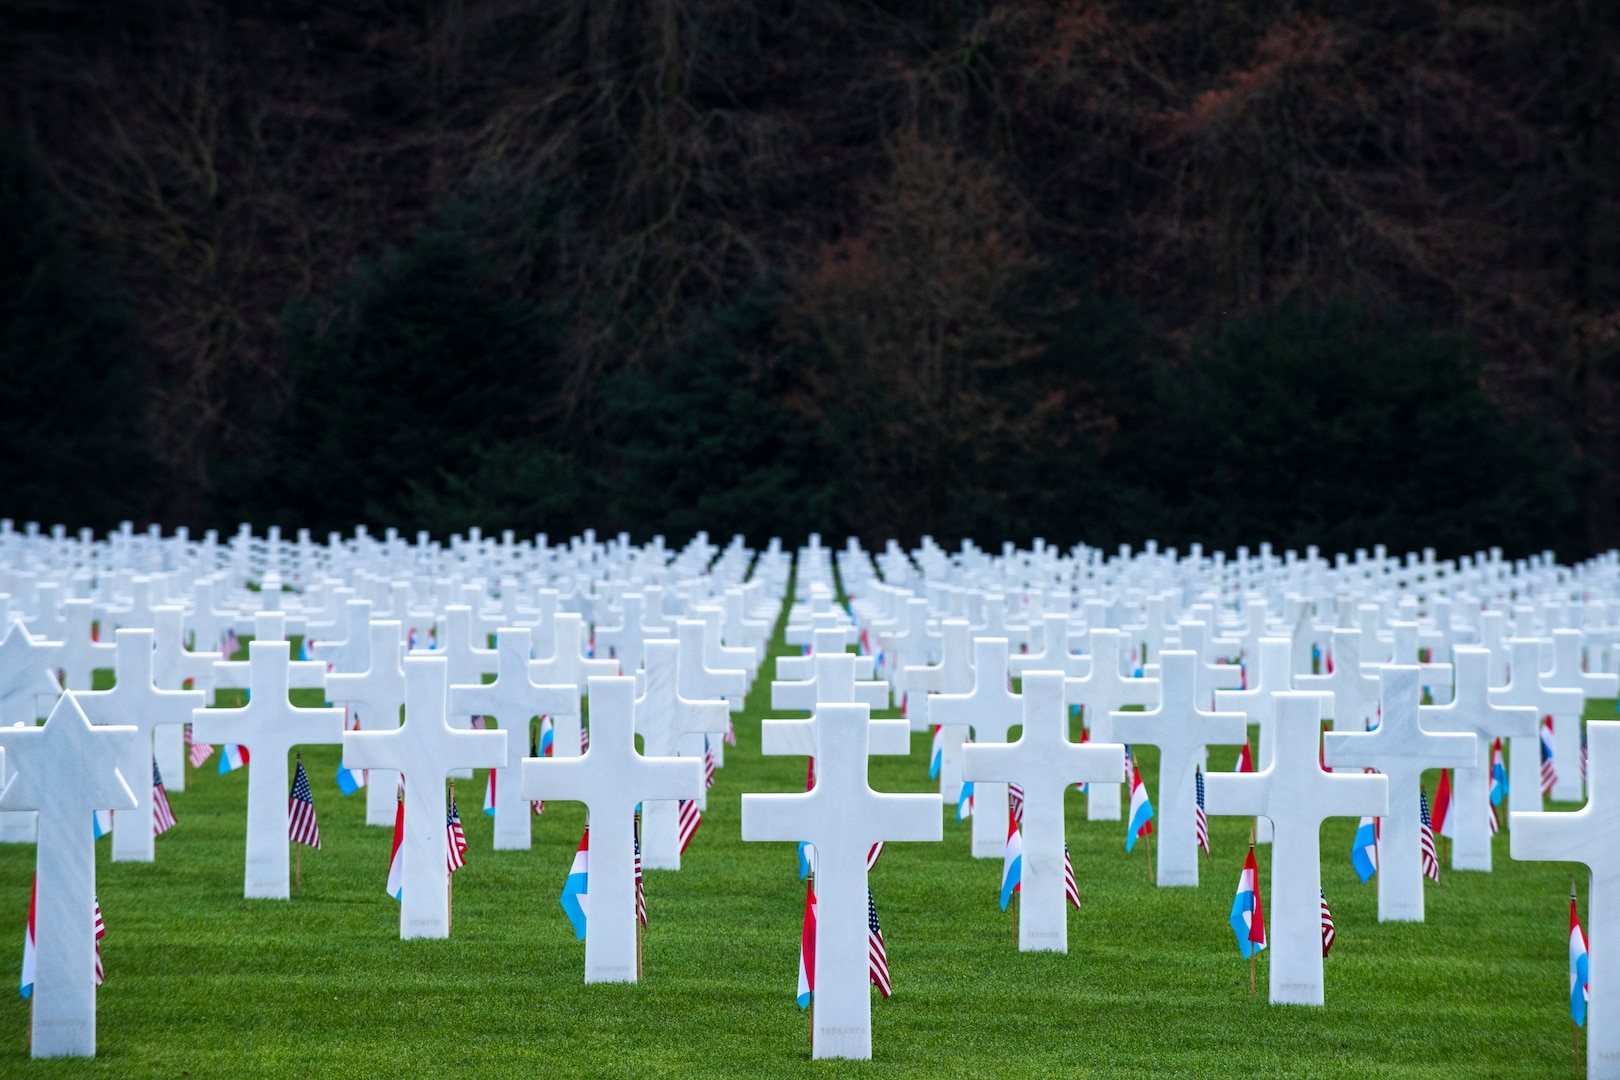 Dr. Mark T. Esper, Secretary of Defense and Army Gen. Mark A. Milley, chairman of the Joint Chiefs of Staff, visit the Luxembourg American Cemetery and Memorial during a ceremony, Dec. 16, 2019. The visit was part of a U.S. delegation tour of the region during the 75th commemoration and anniversary of the Battle of the Bulge. The cemetery, containing 5,073 American war dead, covers 50.5 acres (20.4 ha) and was dedicated in 1960. It is administered by the American Battle Monuments Commission.